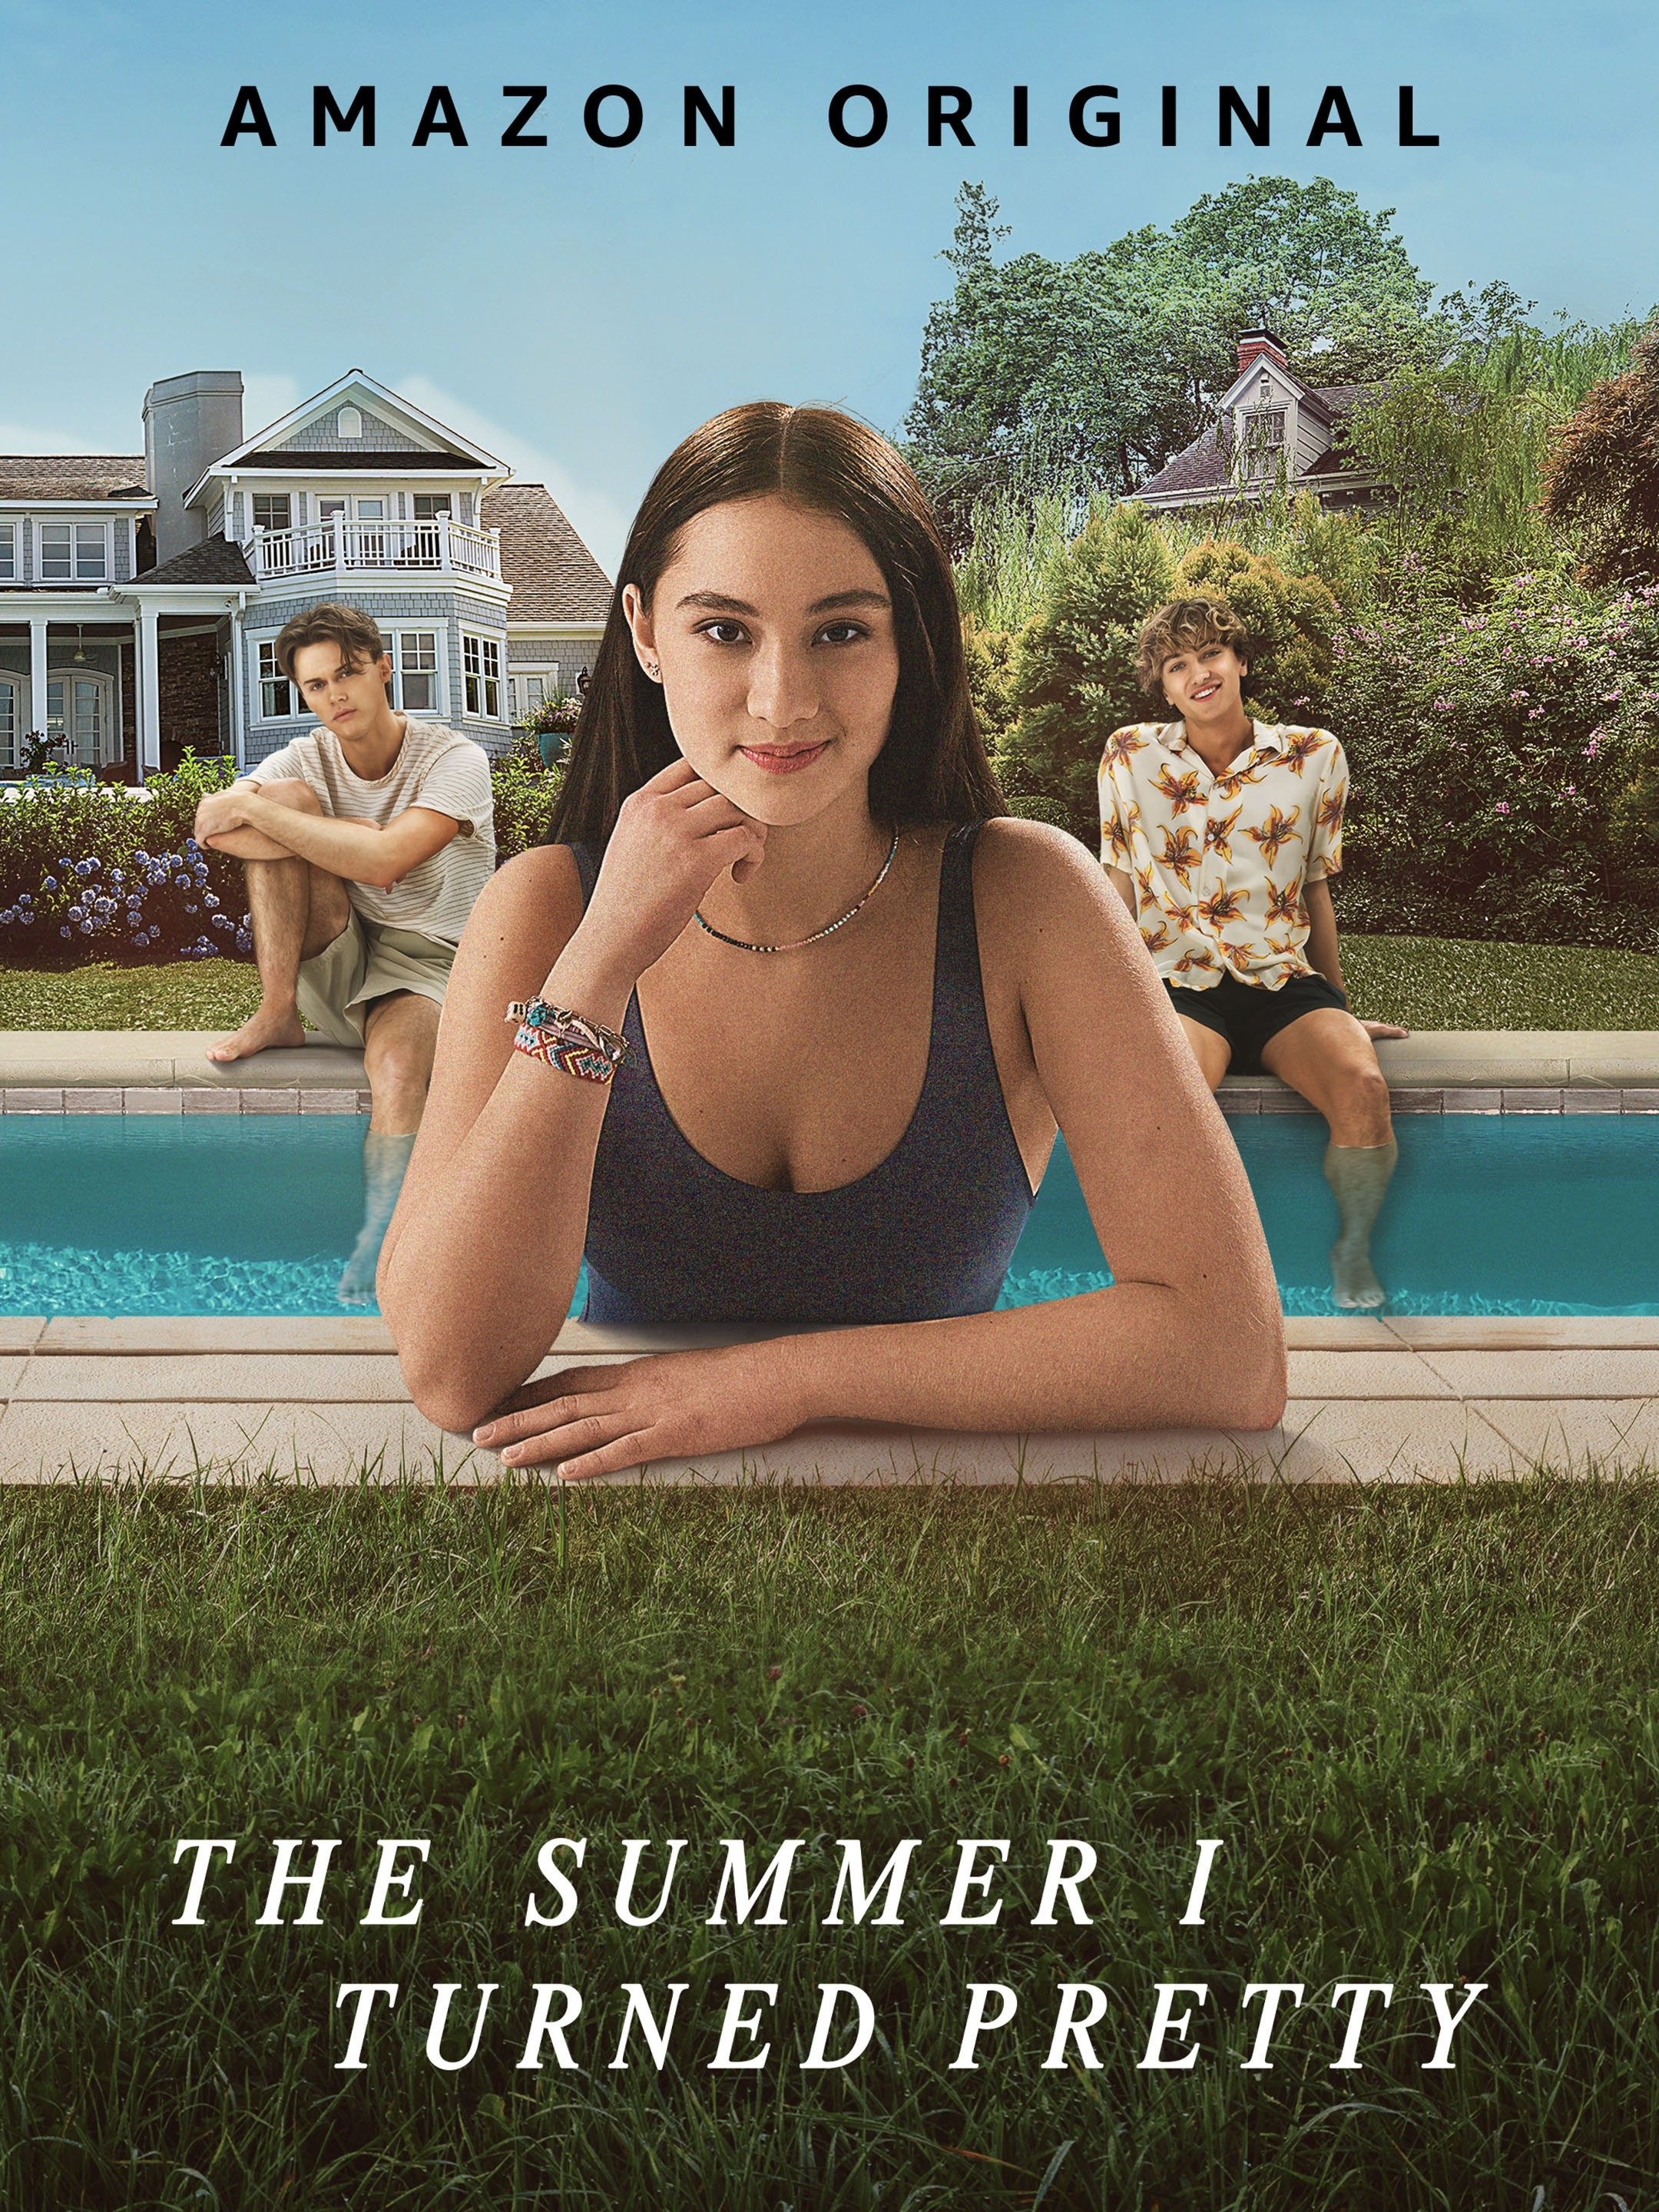 The Summer I Turned Pretty: Season 1 REVIEW - A Sweet Summer Escape